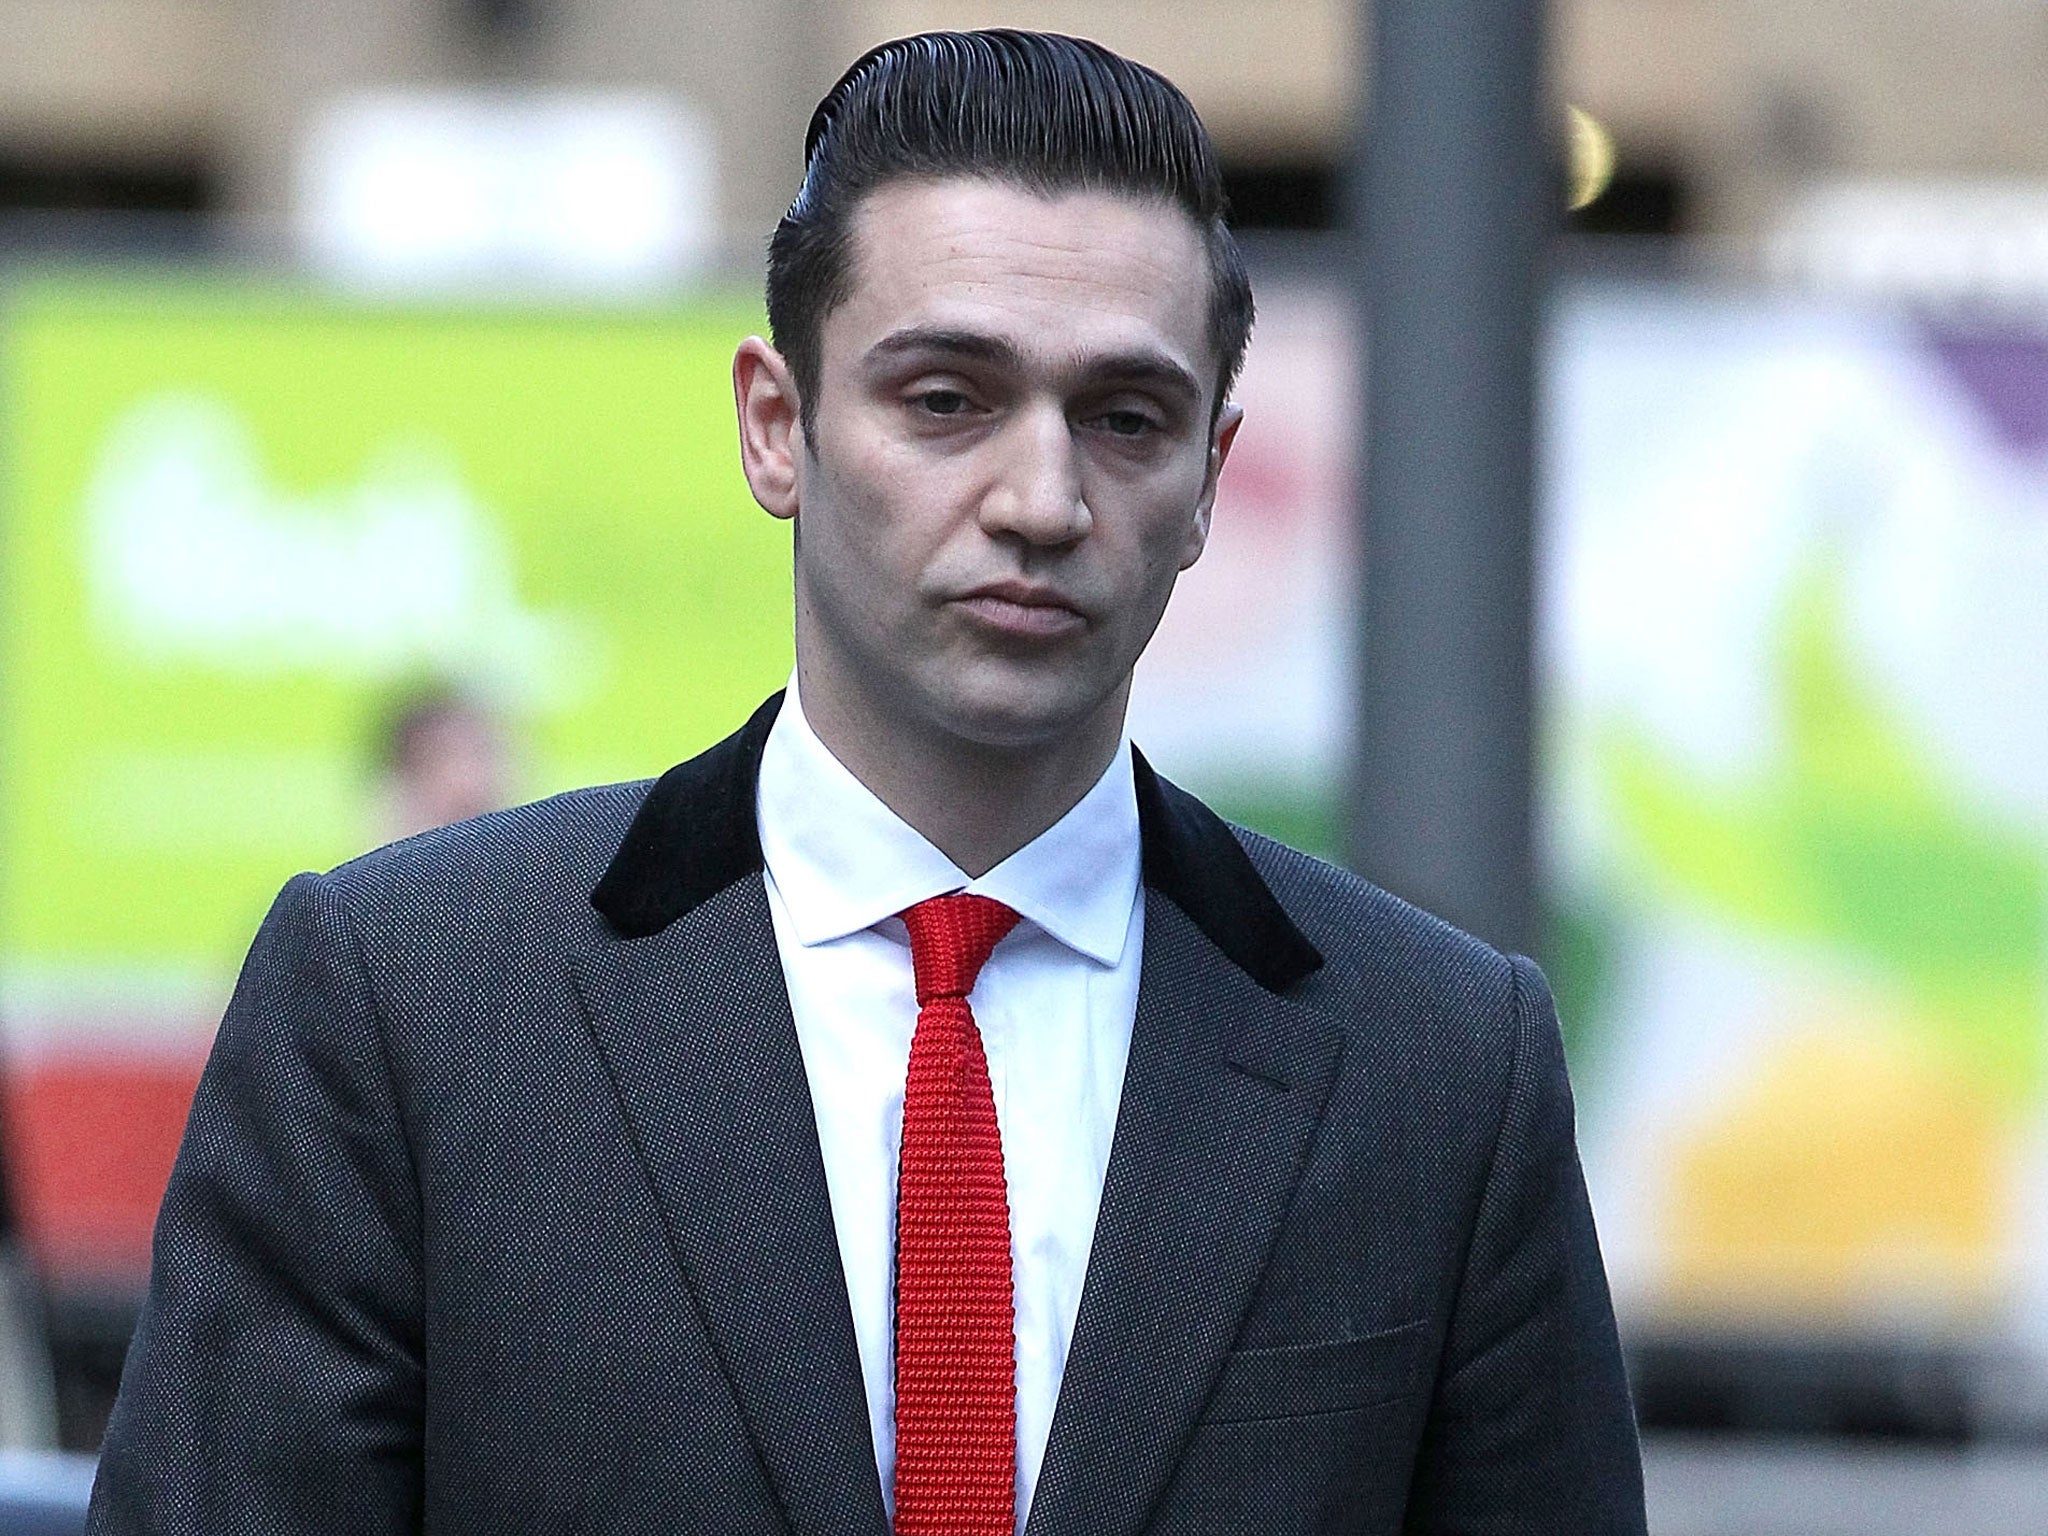 Reg Traviss acquitted by jury after less than three hours deliberation